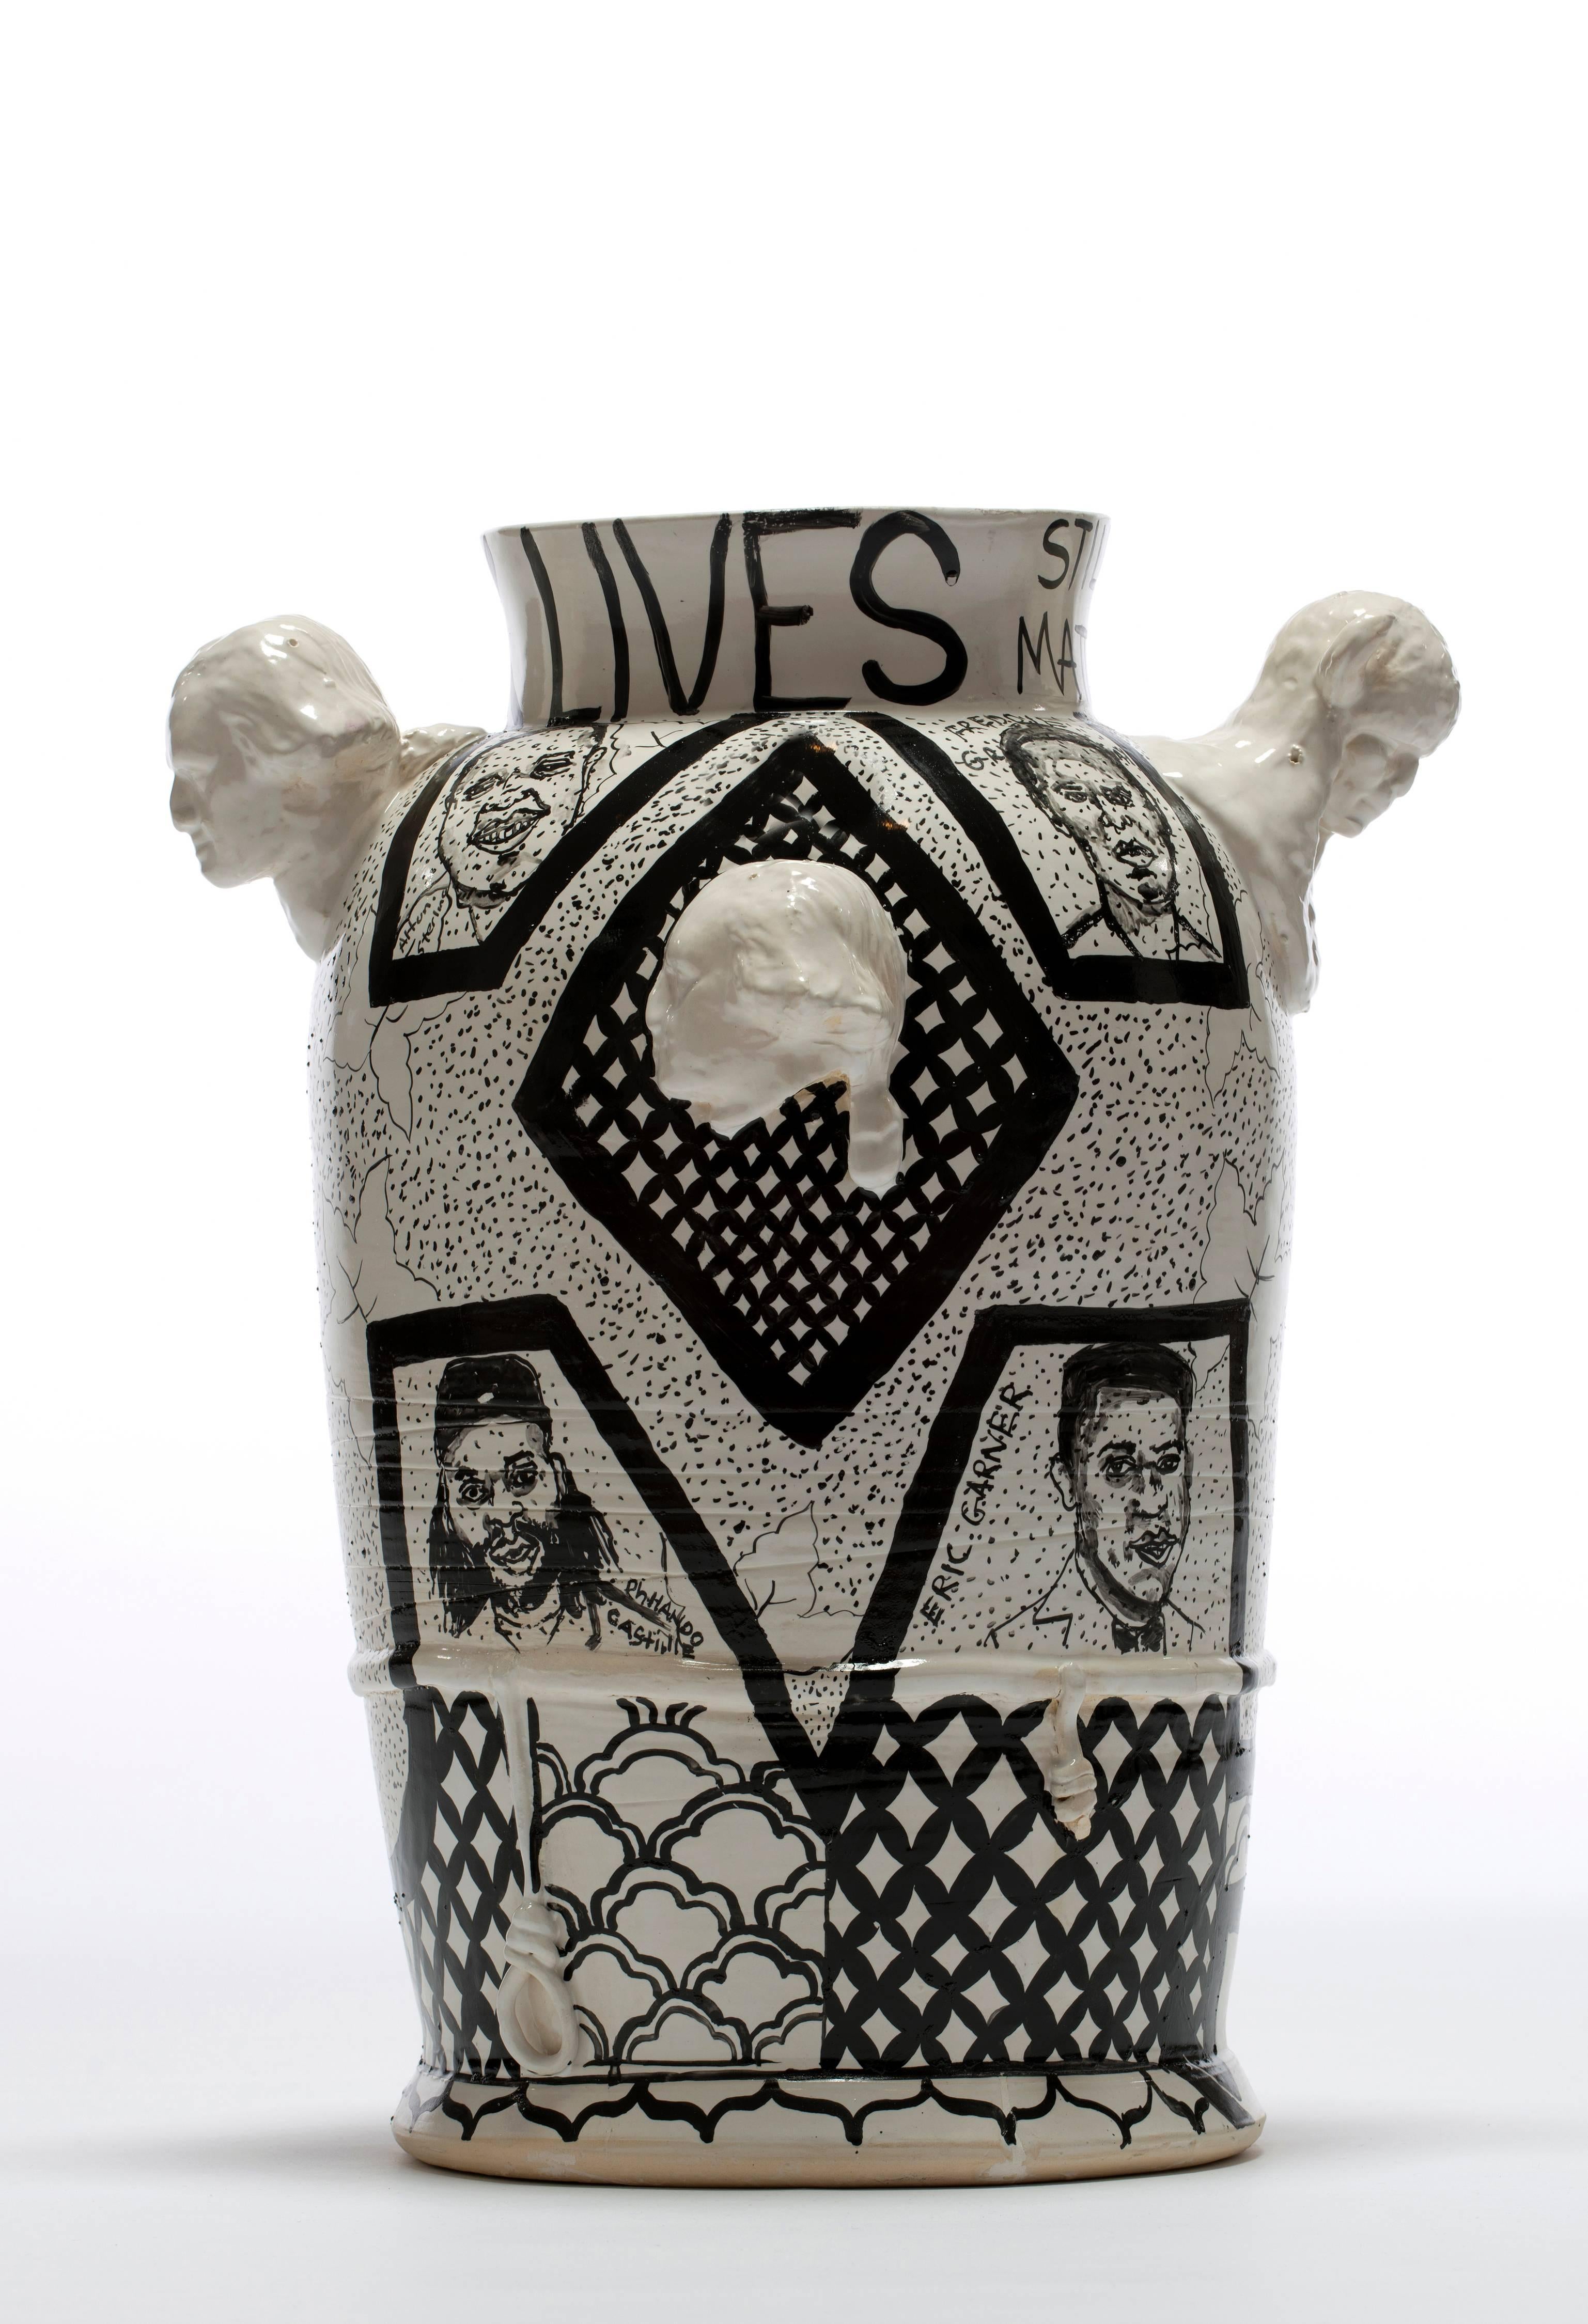 A Century of Black Lives Mattering is made by Roberto Lugo out of porcelain, china paint and gold luster.

Best known for expertly thrown ceramic vessels that are illustrated with activists, political figures, and hip-hop legends, Lugo aims to reach